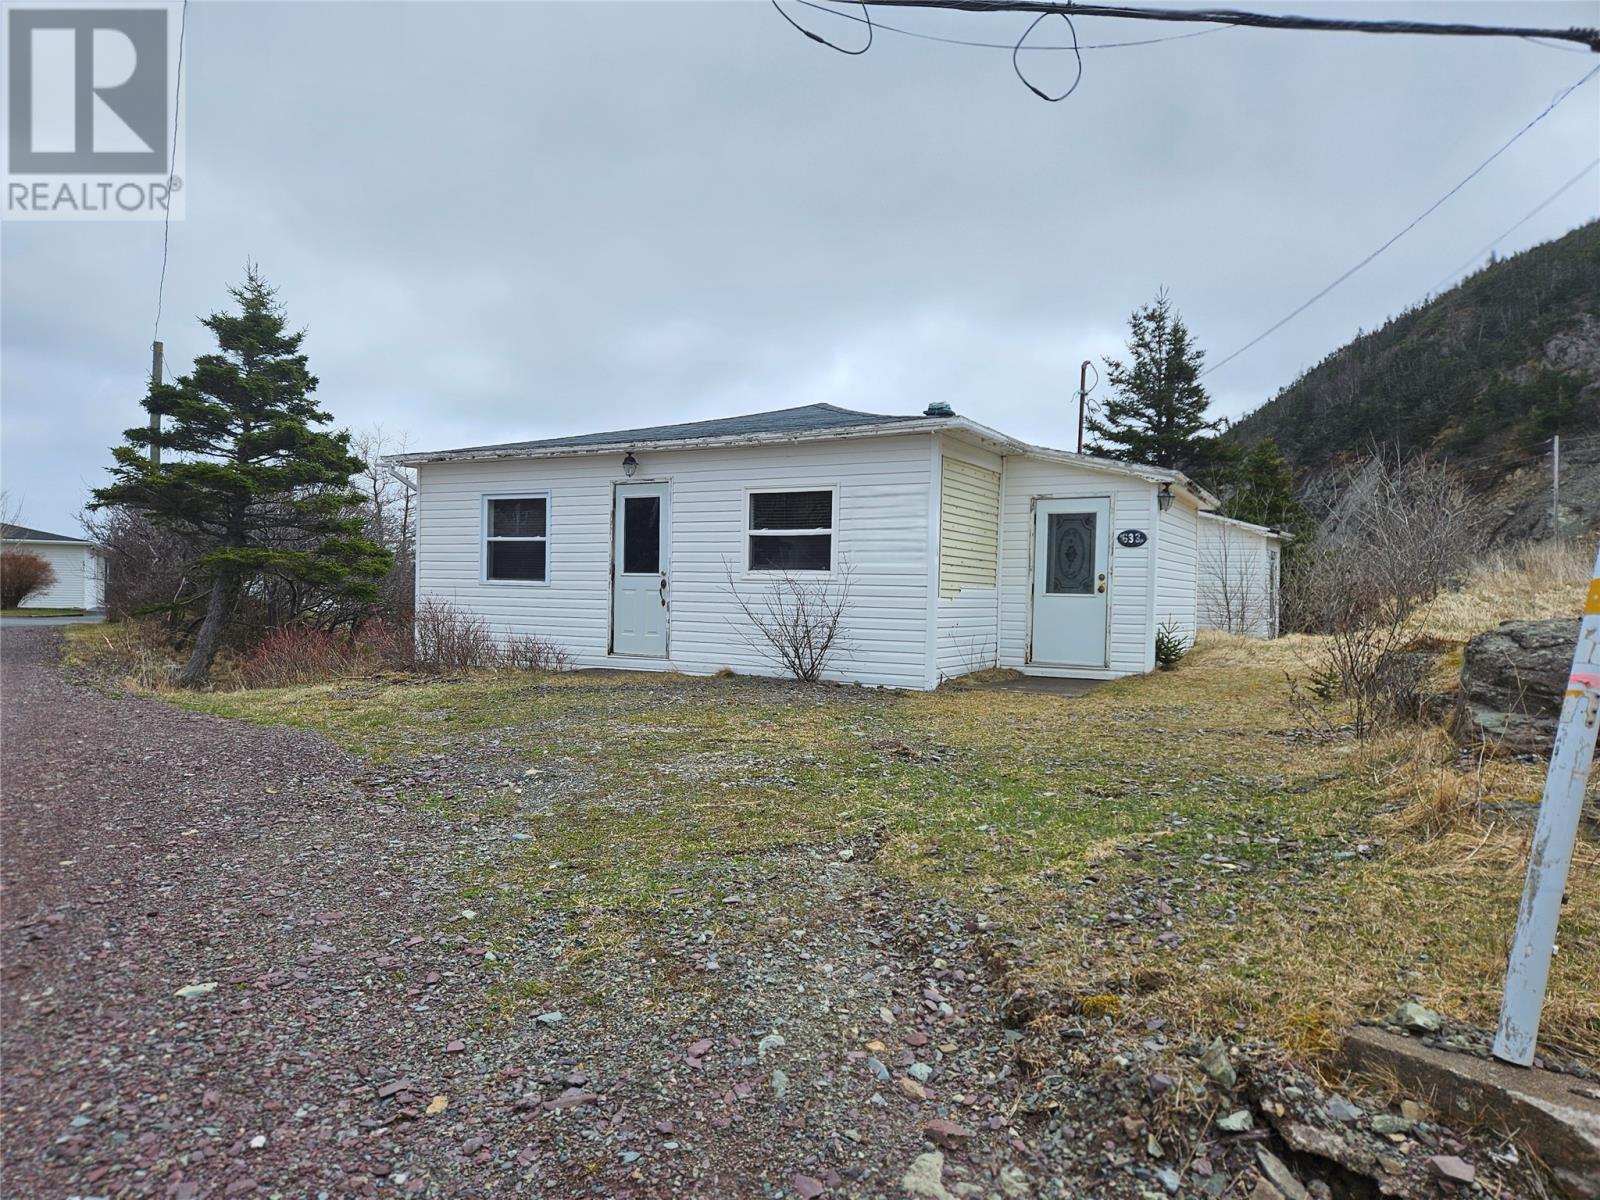 2 Bedroom Residential Home For Sale | 633 Main Street | Burin | A0E1E0